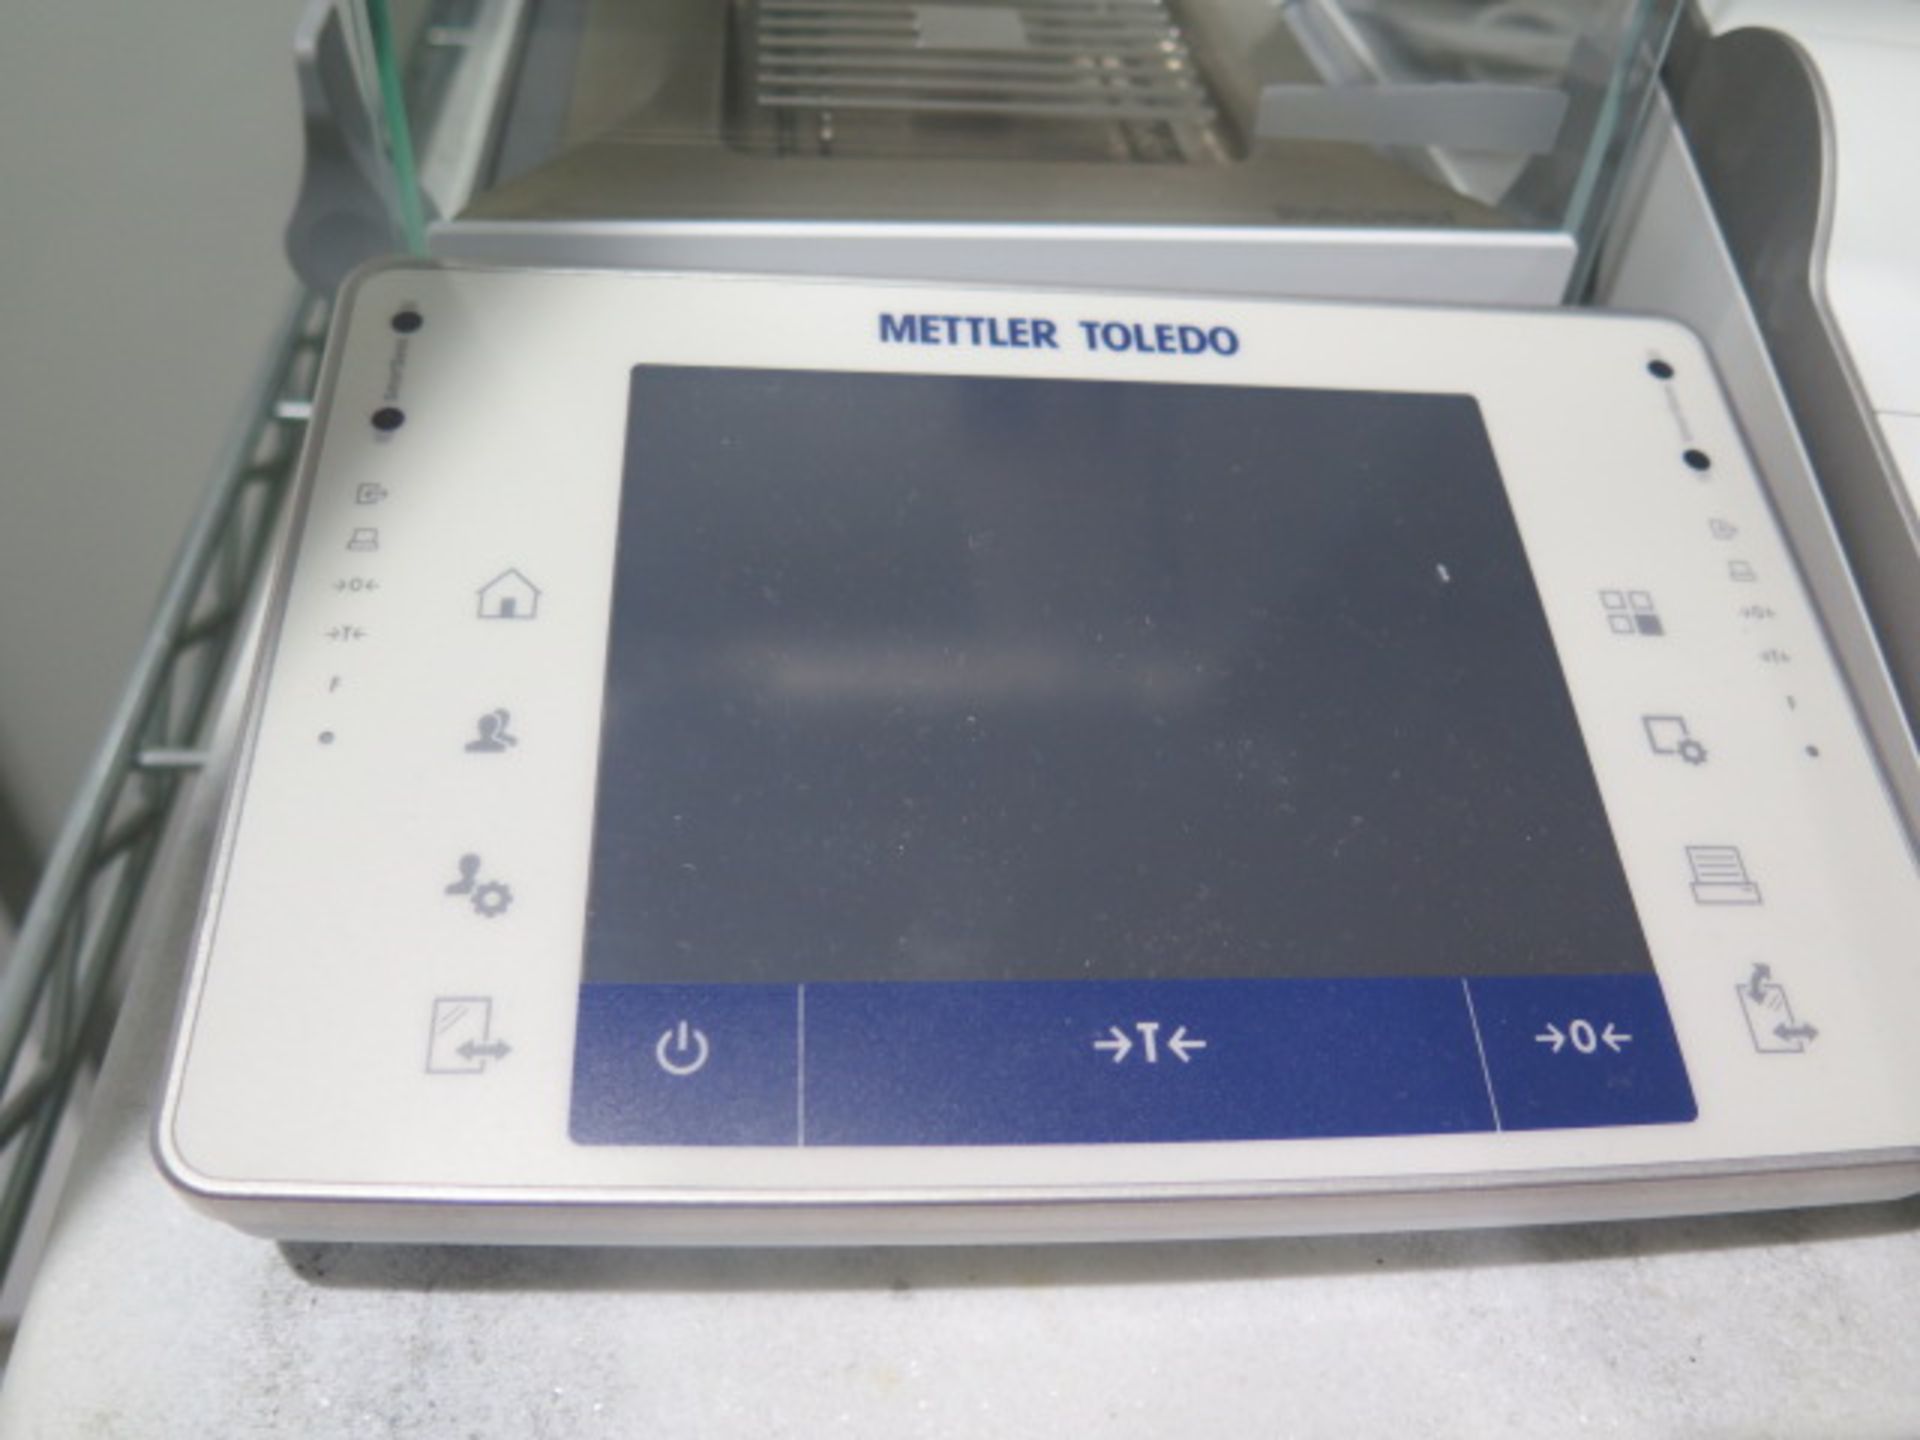 Mettler Toledo XPE205 DeltaRange Analytical Balance Scale 0.01mg-220g w/ Static Detect, SOLD AS IS - Image 7 of 8